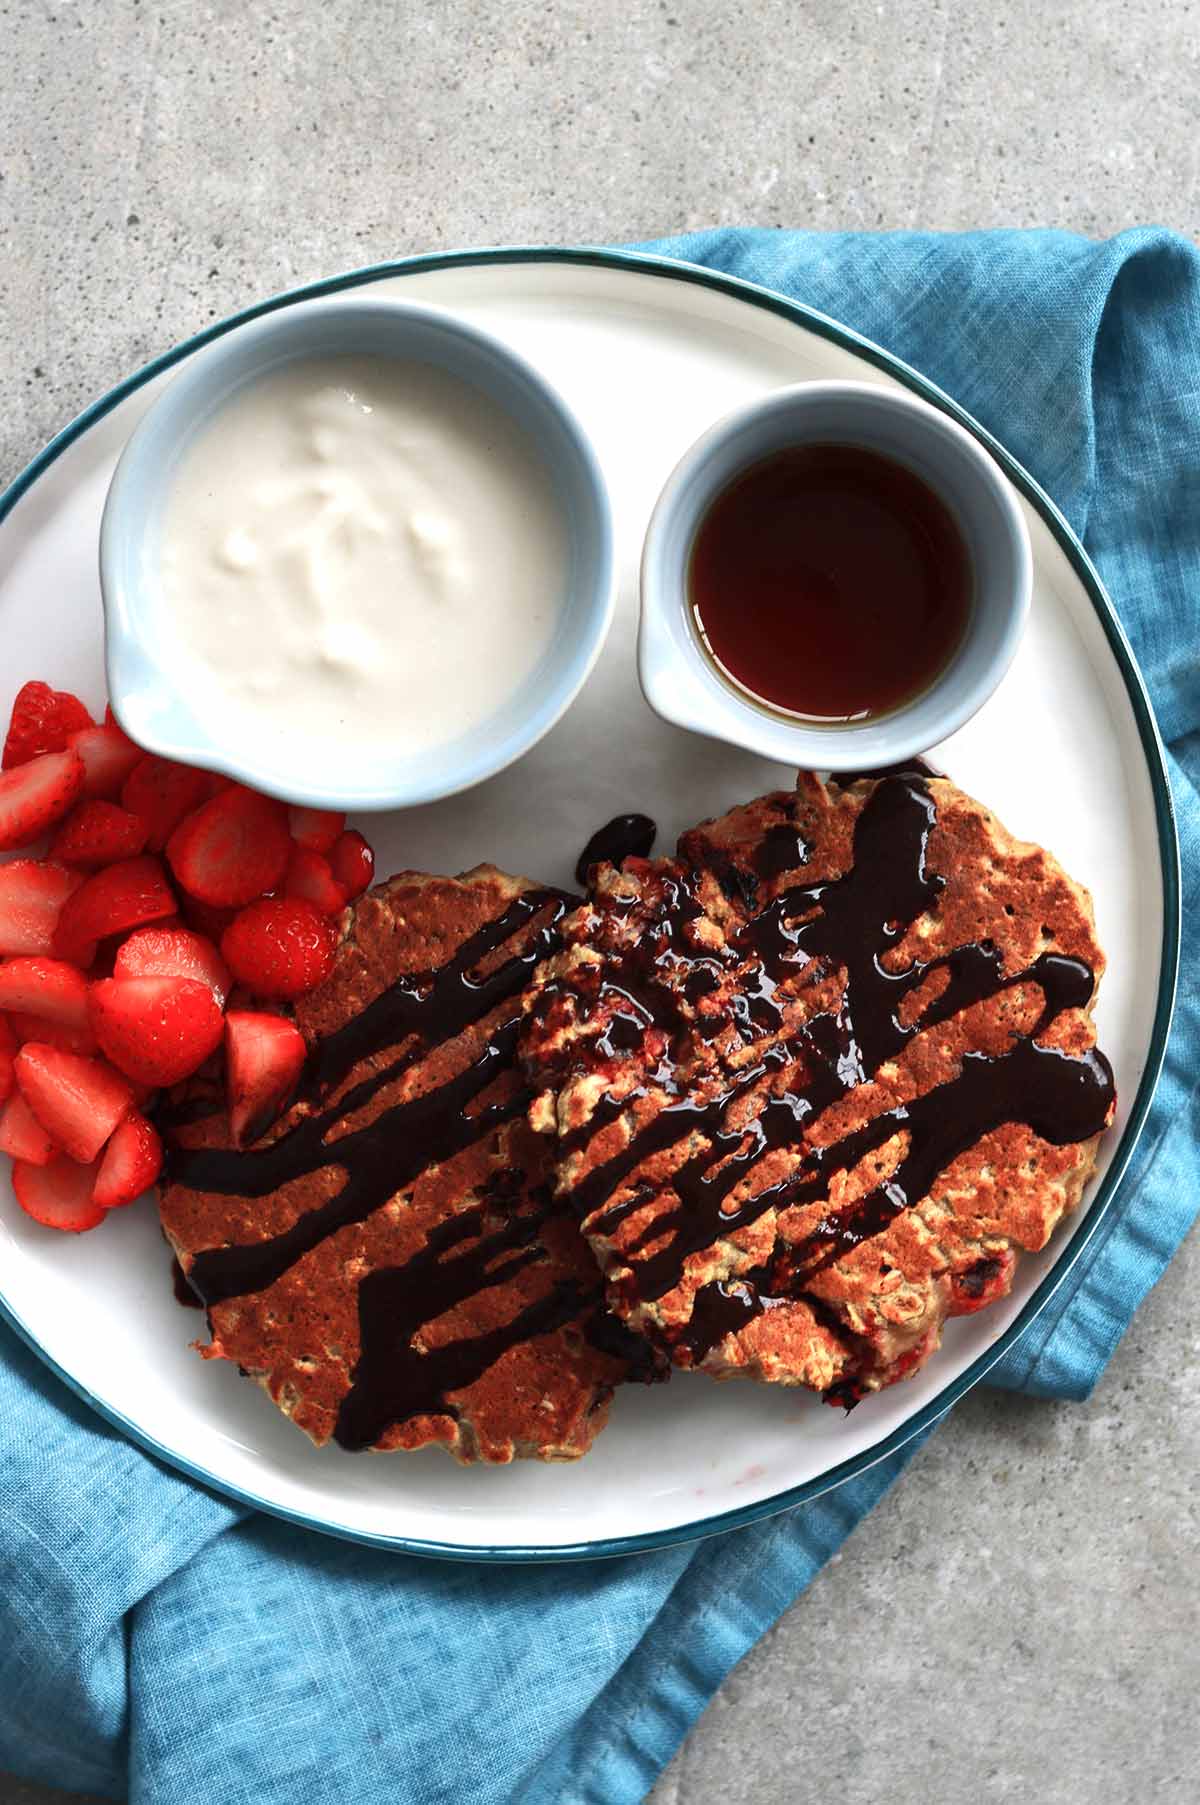 Strawberry and oatmeal pancakes served with maple syrup, yogurt and chopped strawberries